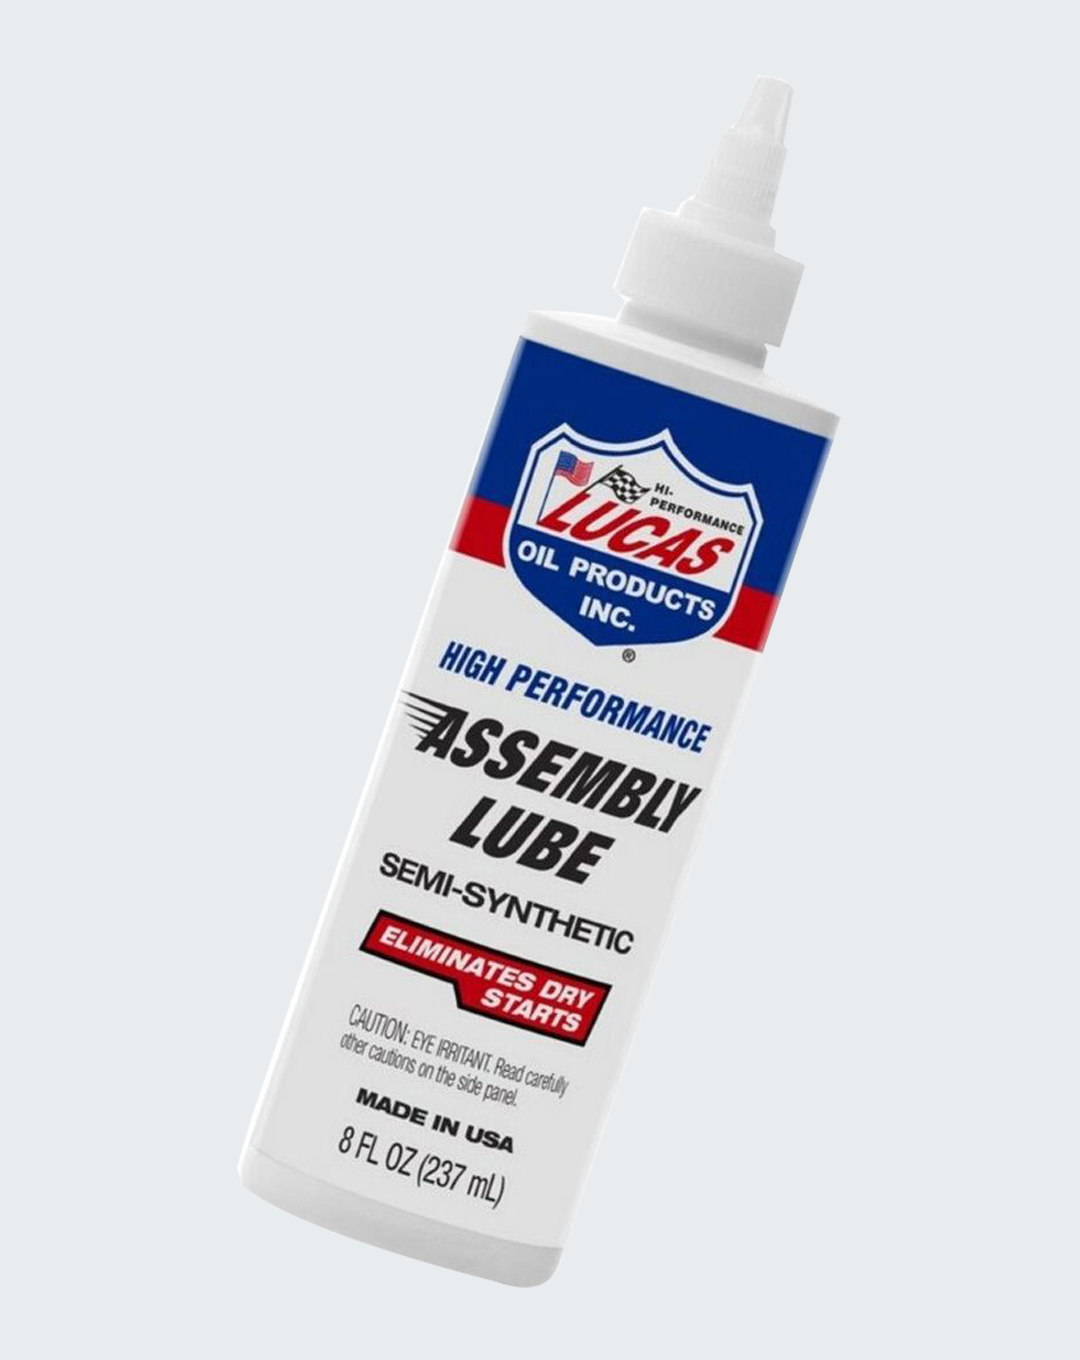 Lucas Oil Assembly Lube, 4oz - JOES Racing Products